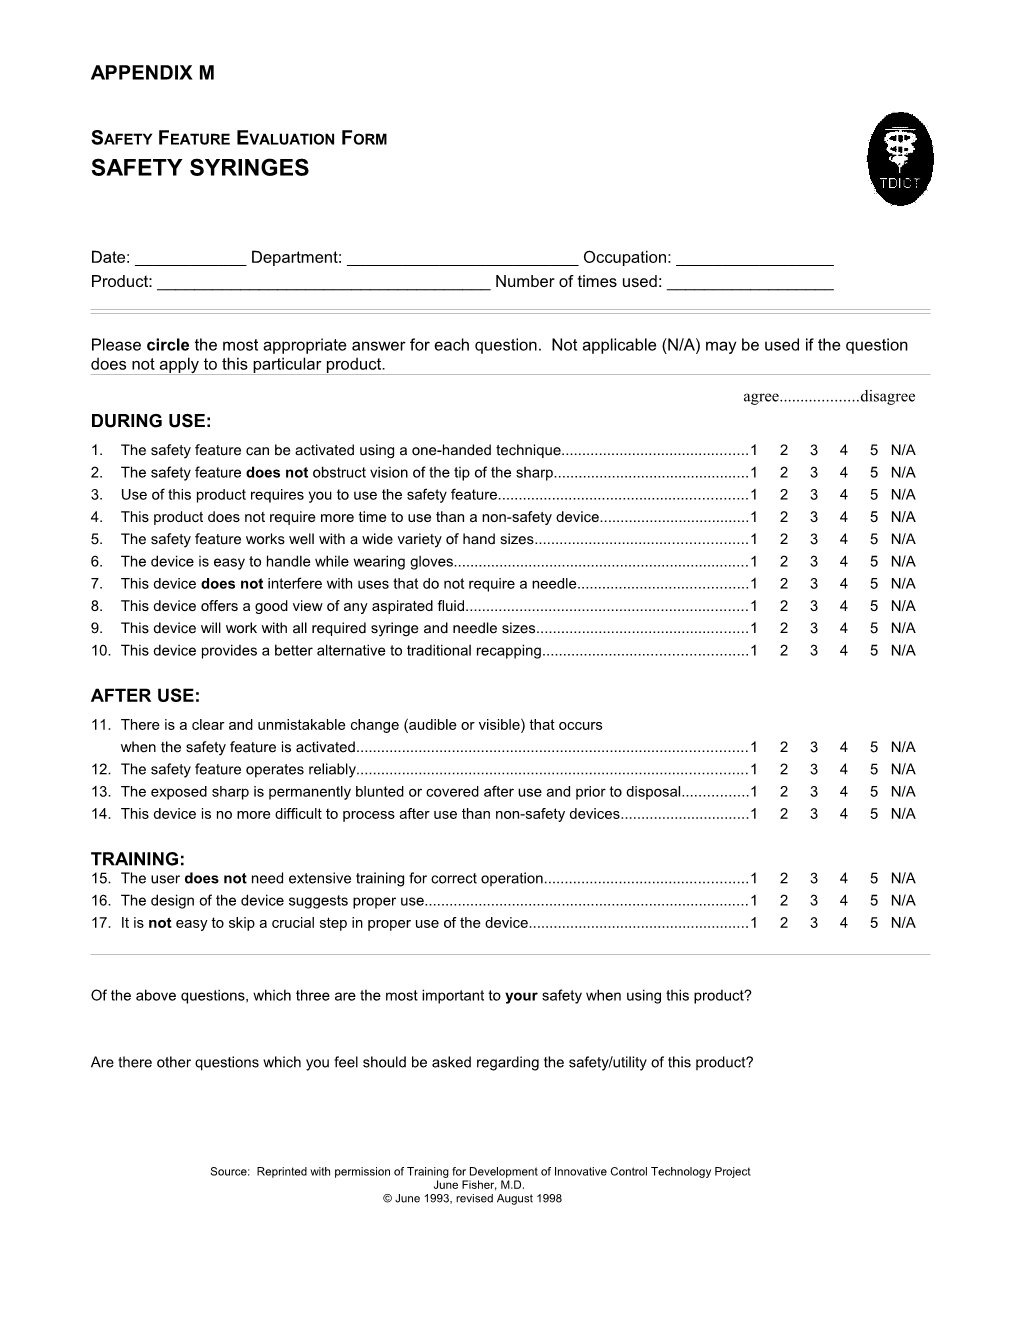 Safety Feature Evaluation Form